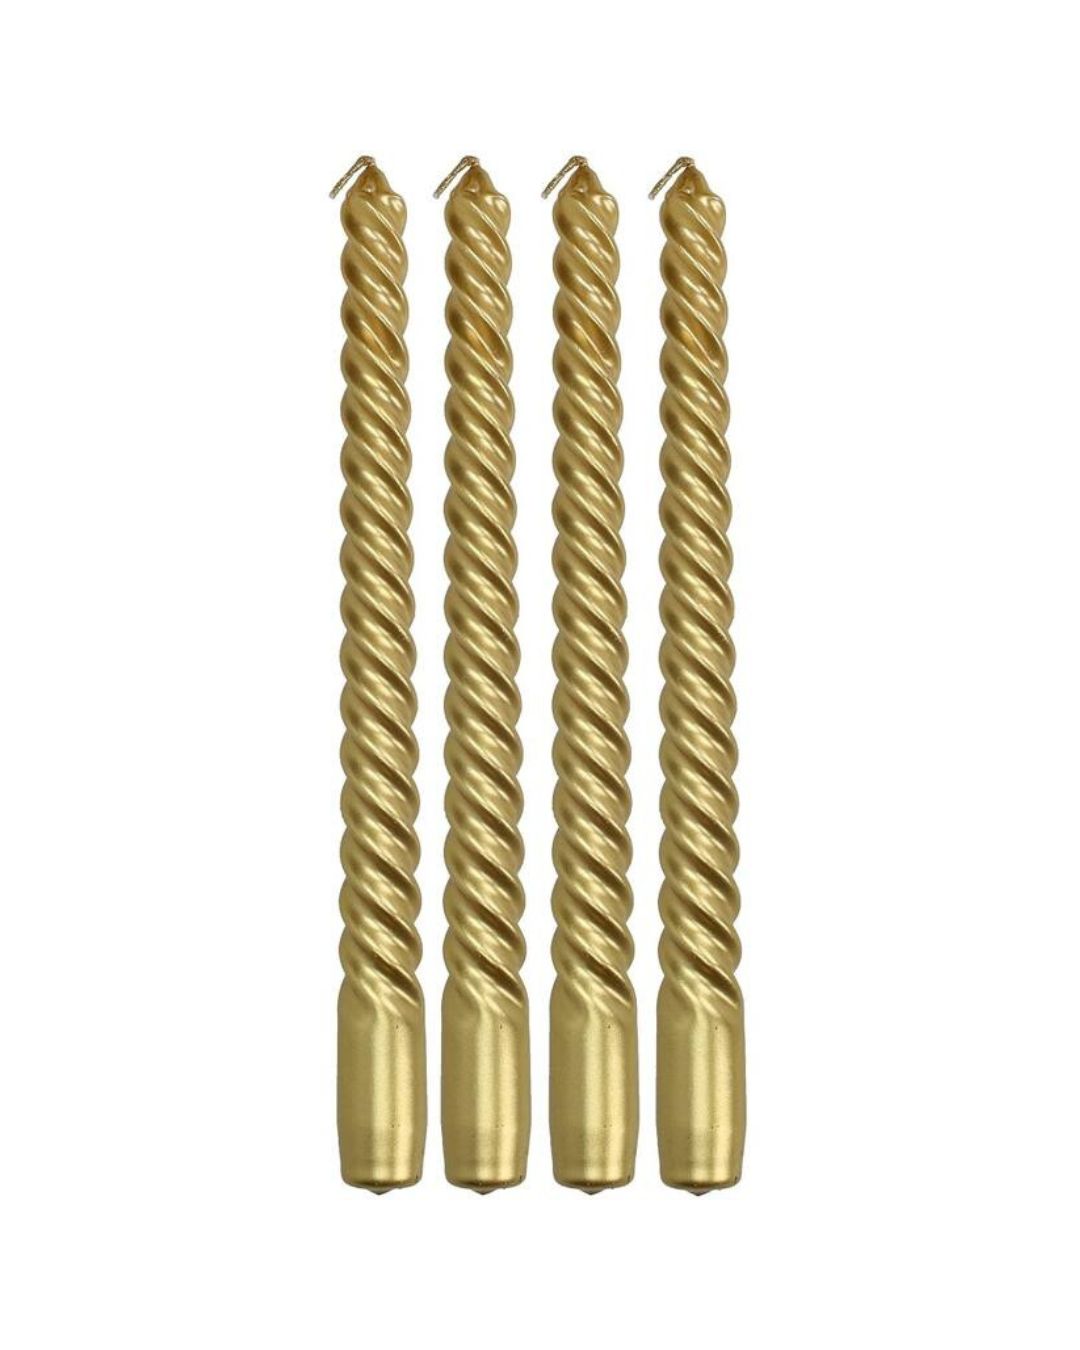 Twisted Candles - Gold (Box of 4)